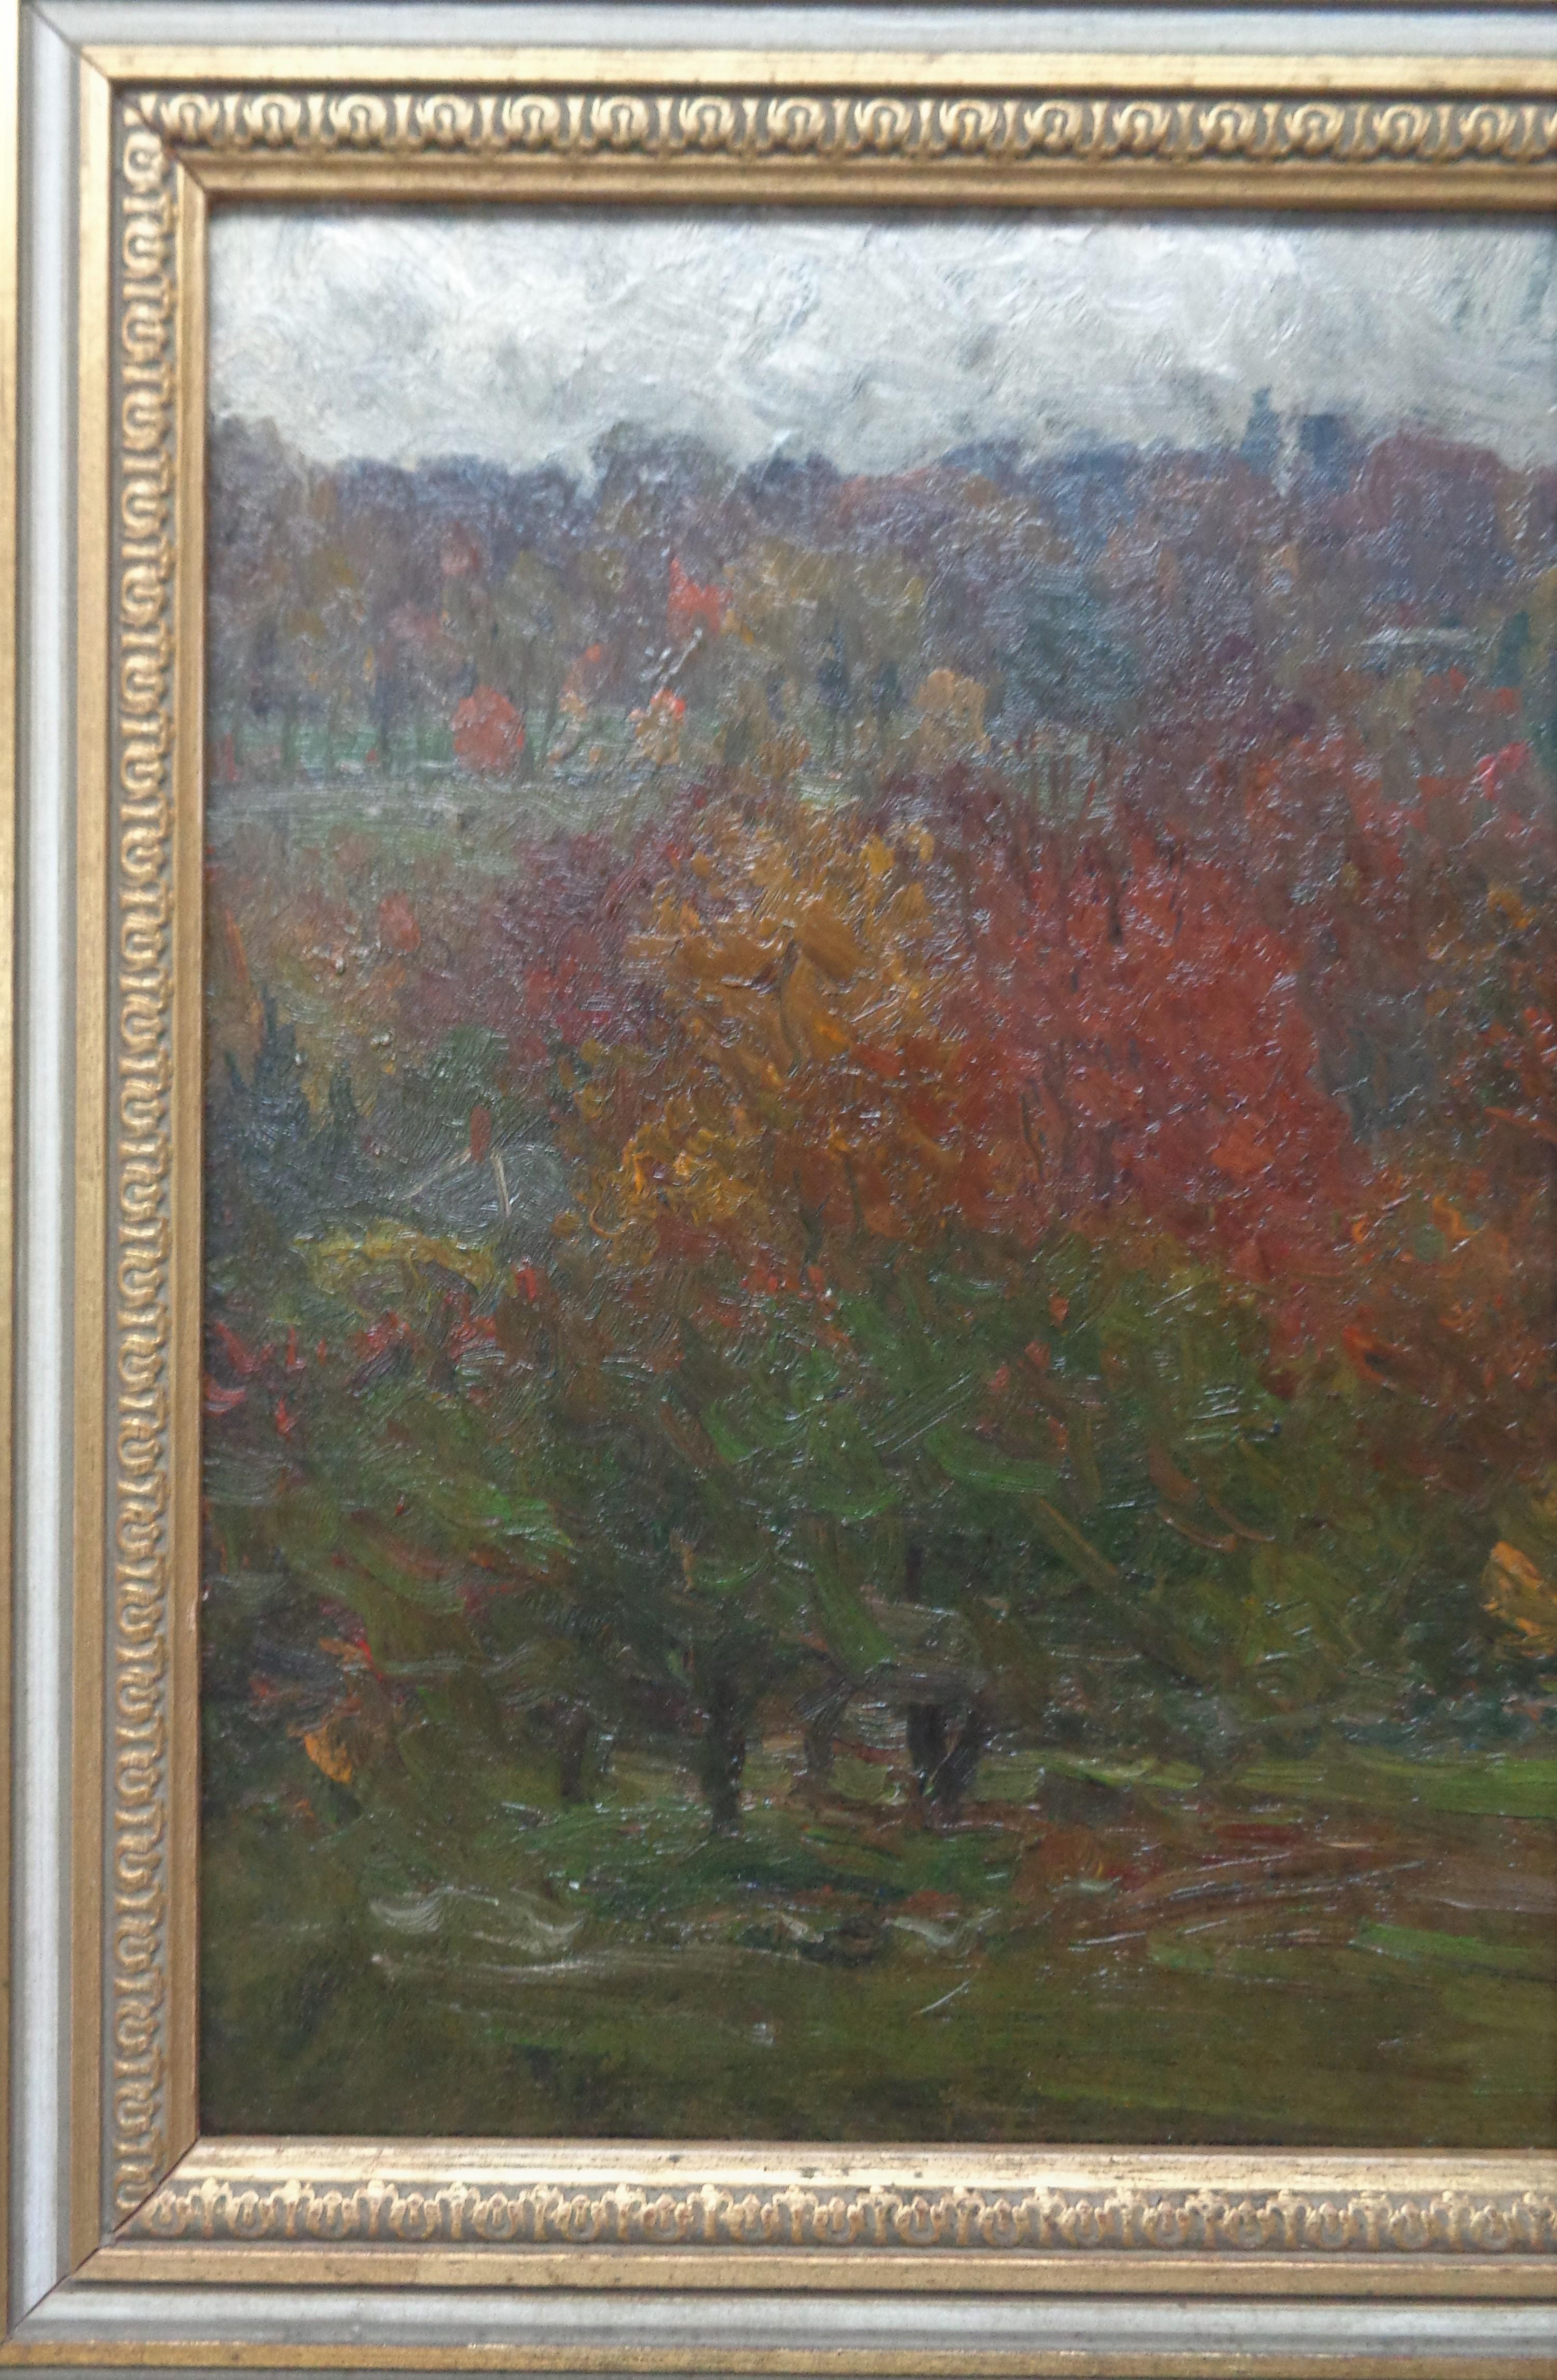 Here is a very beautiful and unique painting on canvas by John J Enneking, Rainy Pastures . The painting is is good shape ready to hang and the original frame as purcahsed shows some age. Image measures 11 x 14 as written verso.  Enneking was an